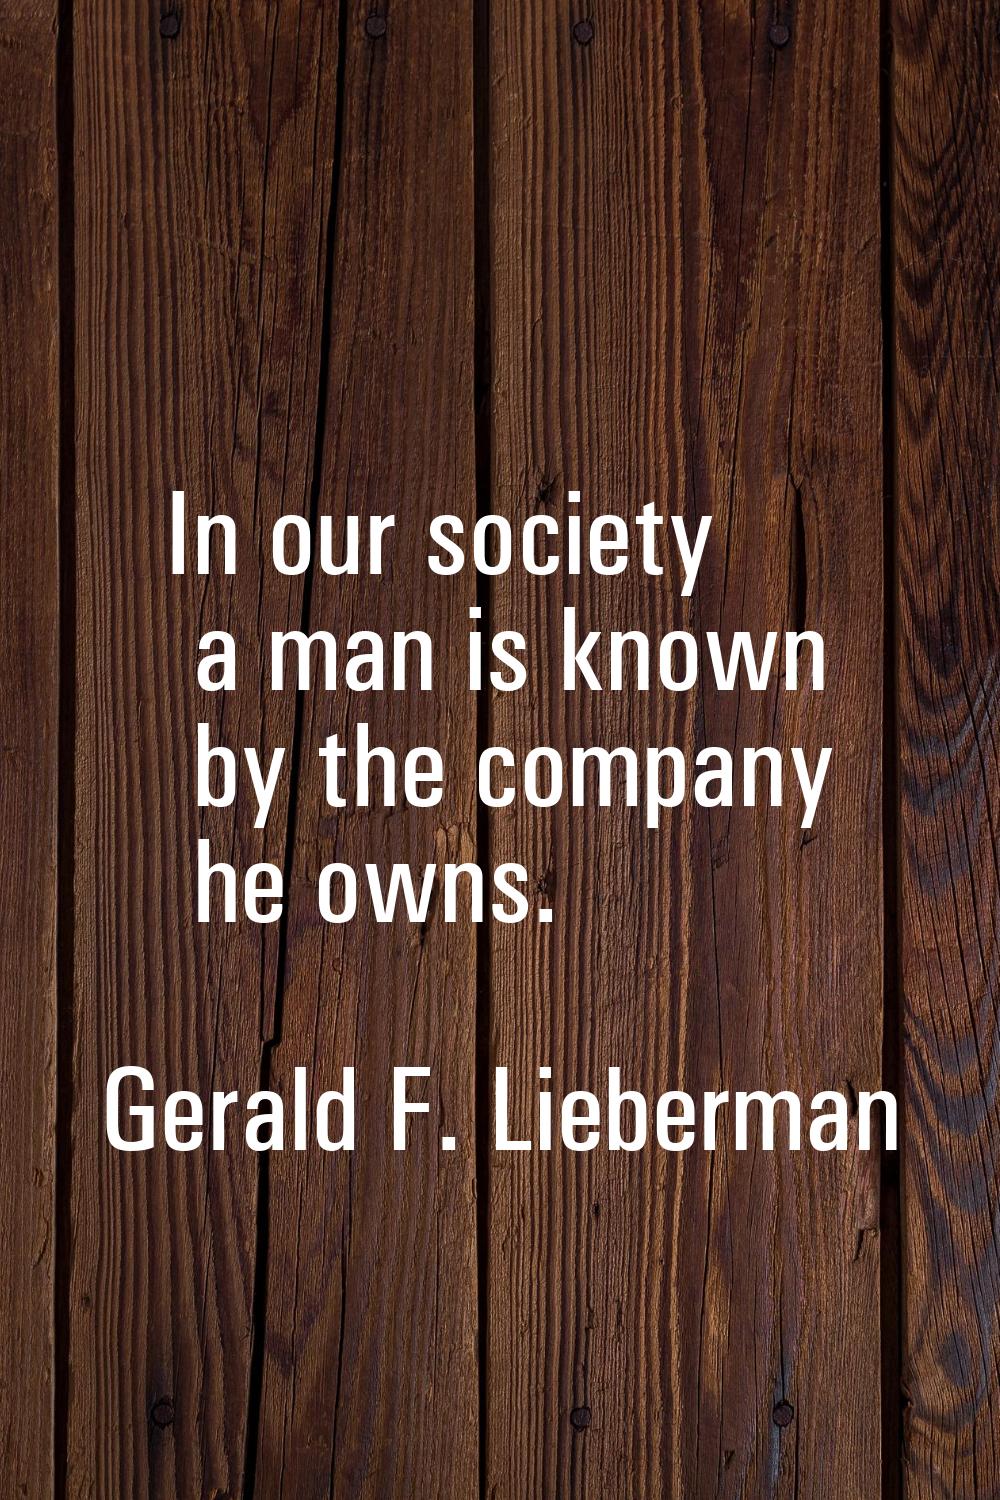 In our society a man is known by the company he owns.